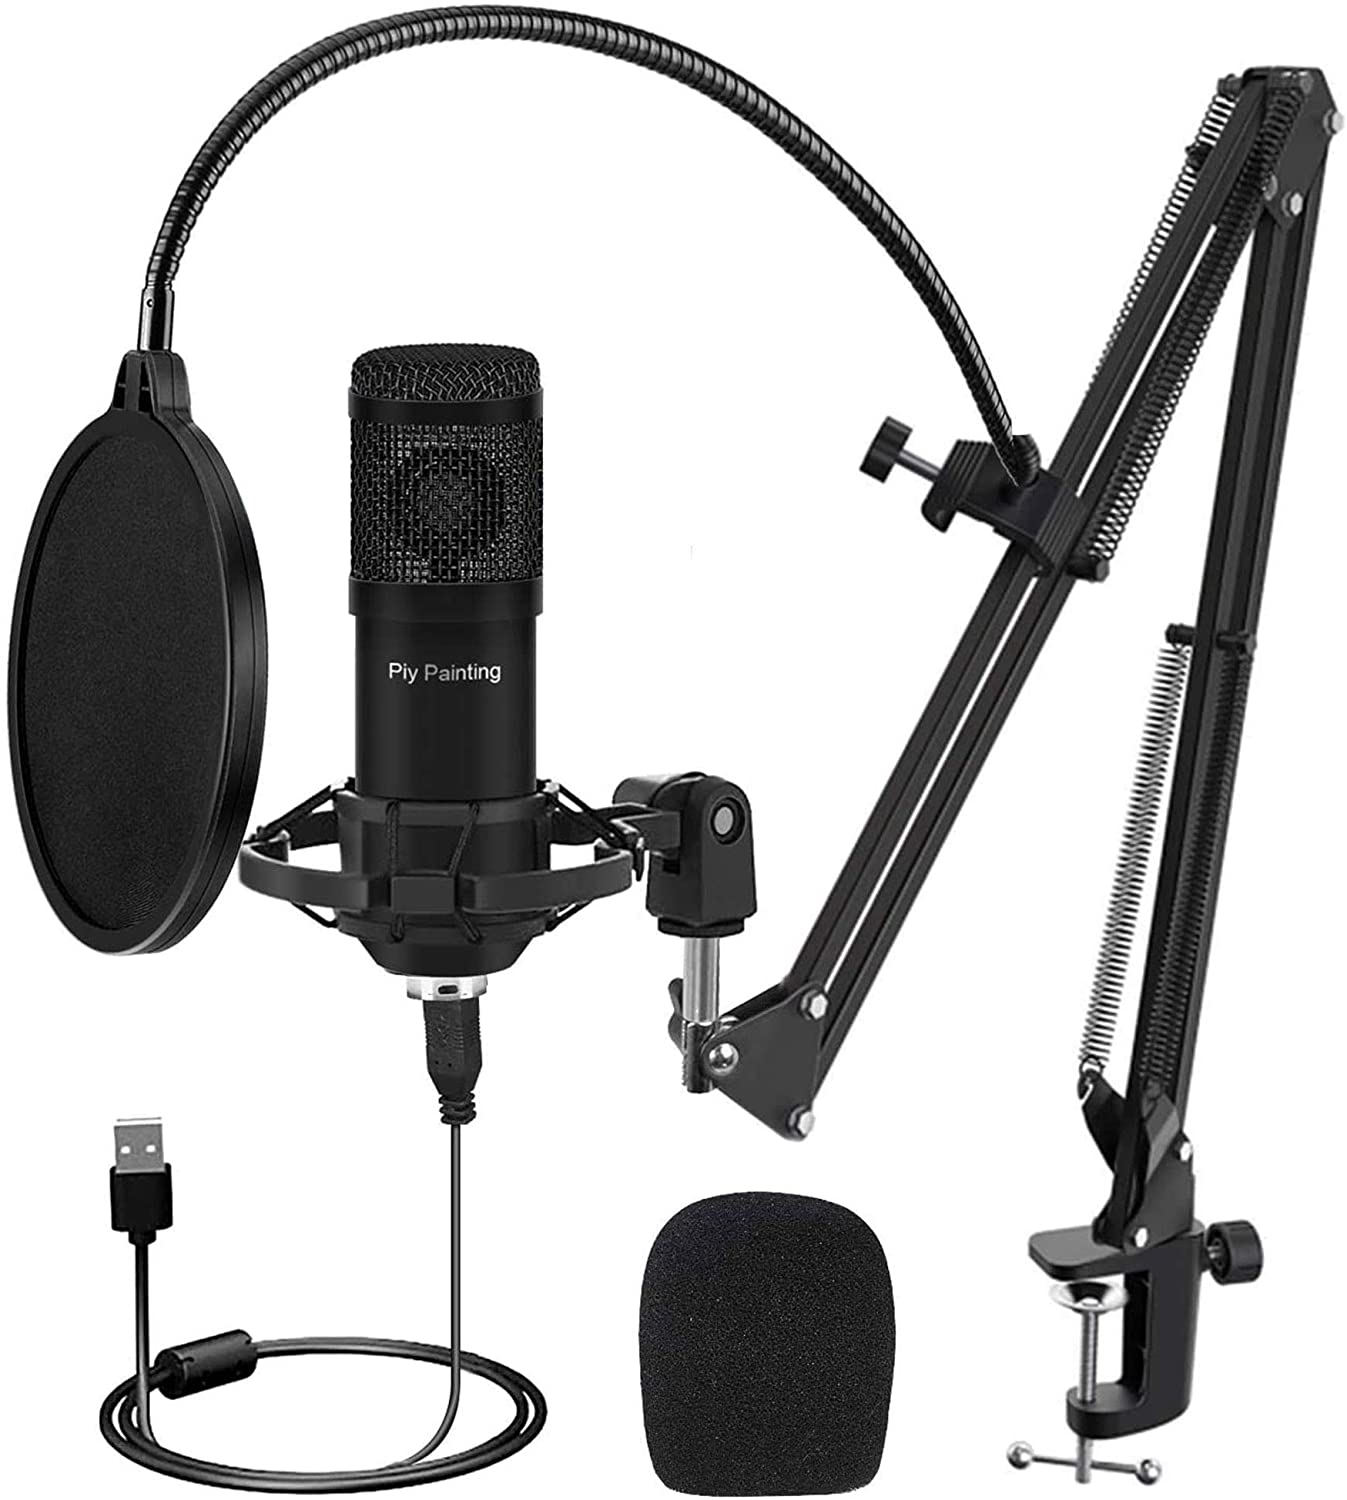 USB Microphone Kit, Piy Painting Cardioid Condenser Microphone Kit